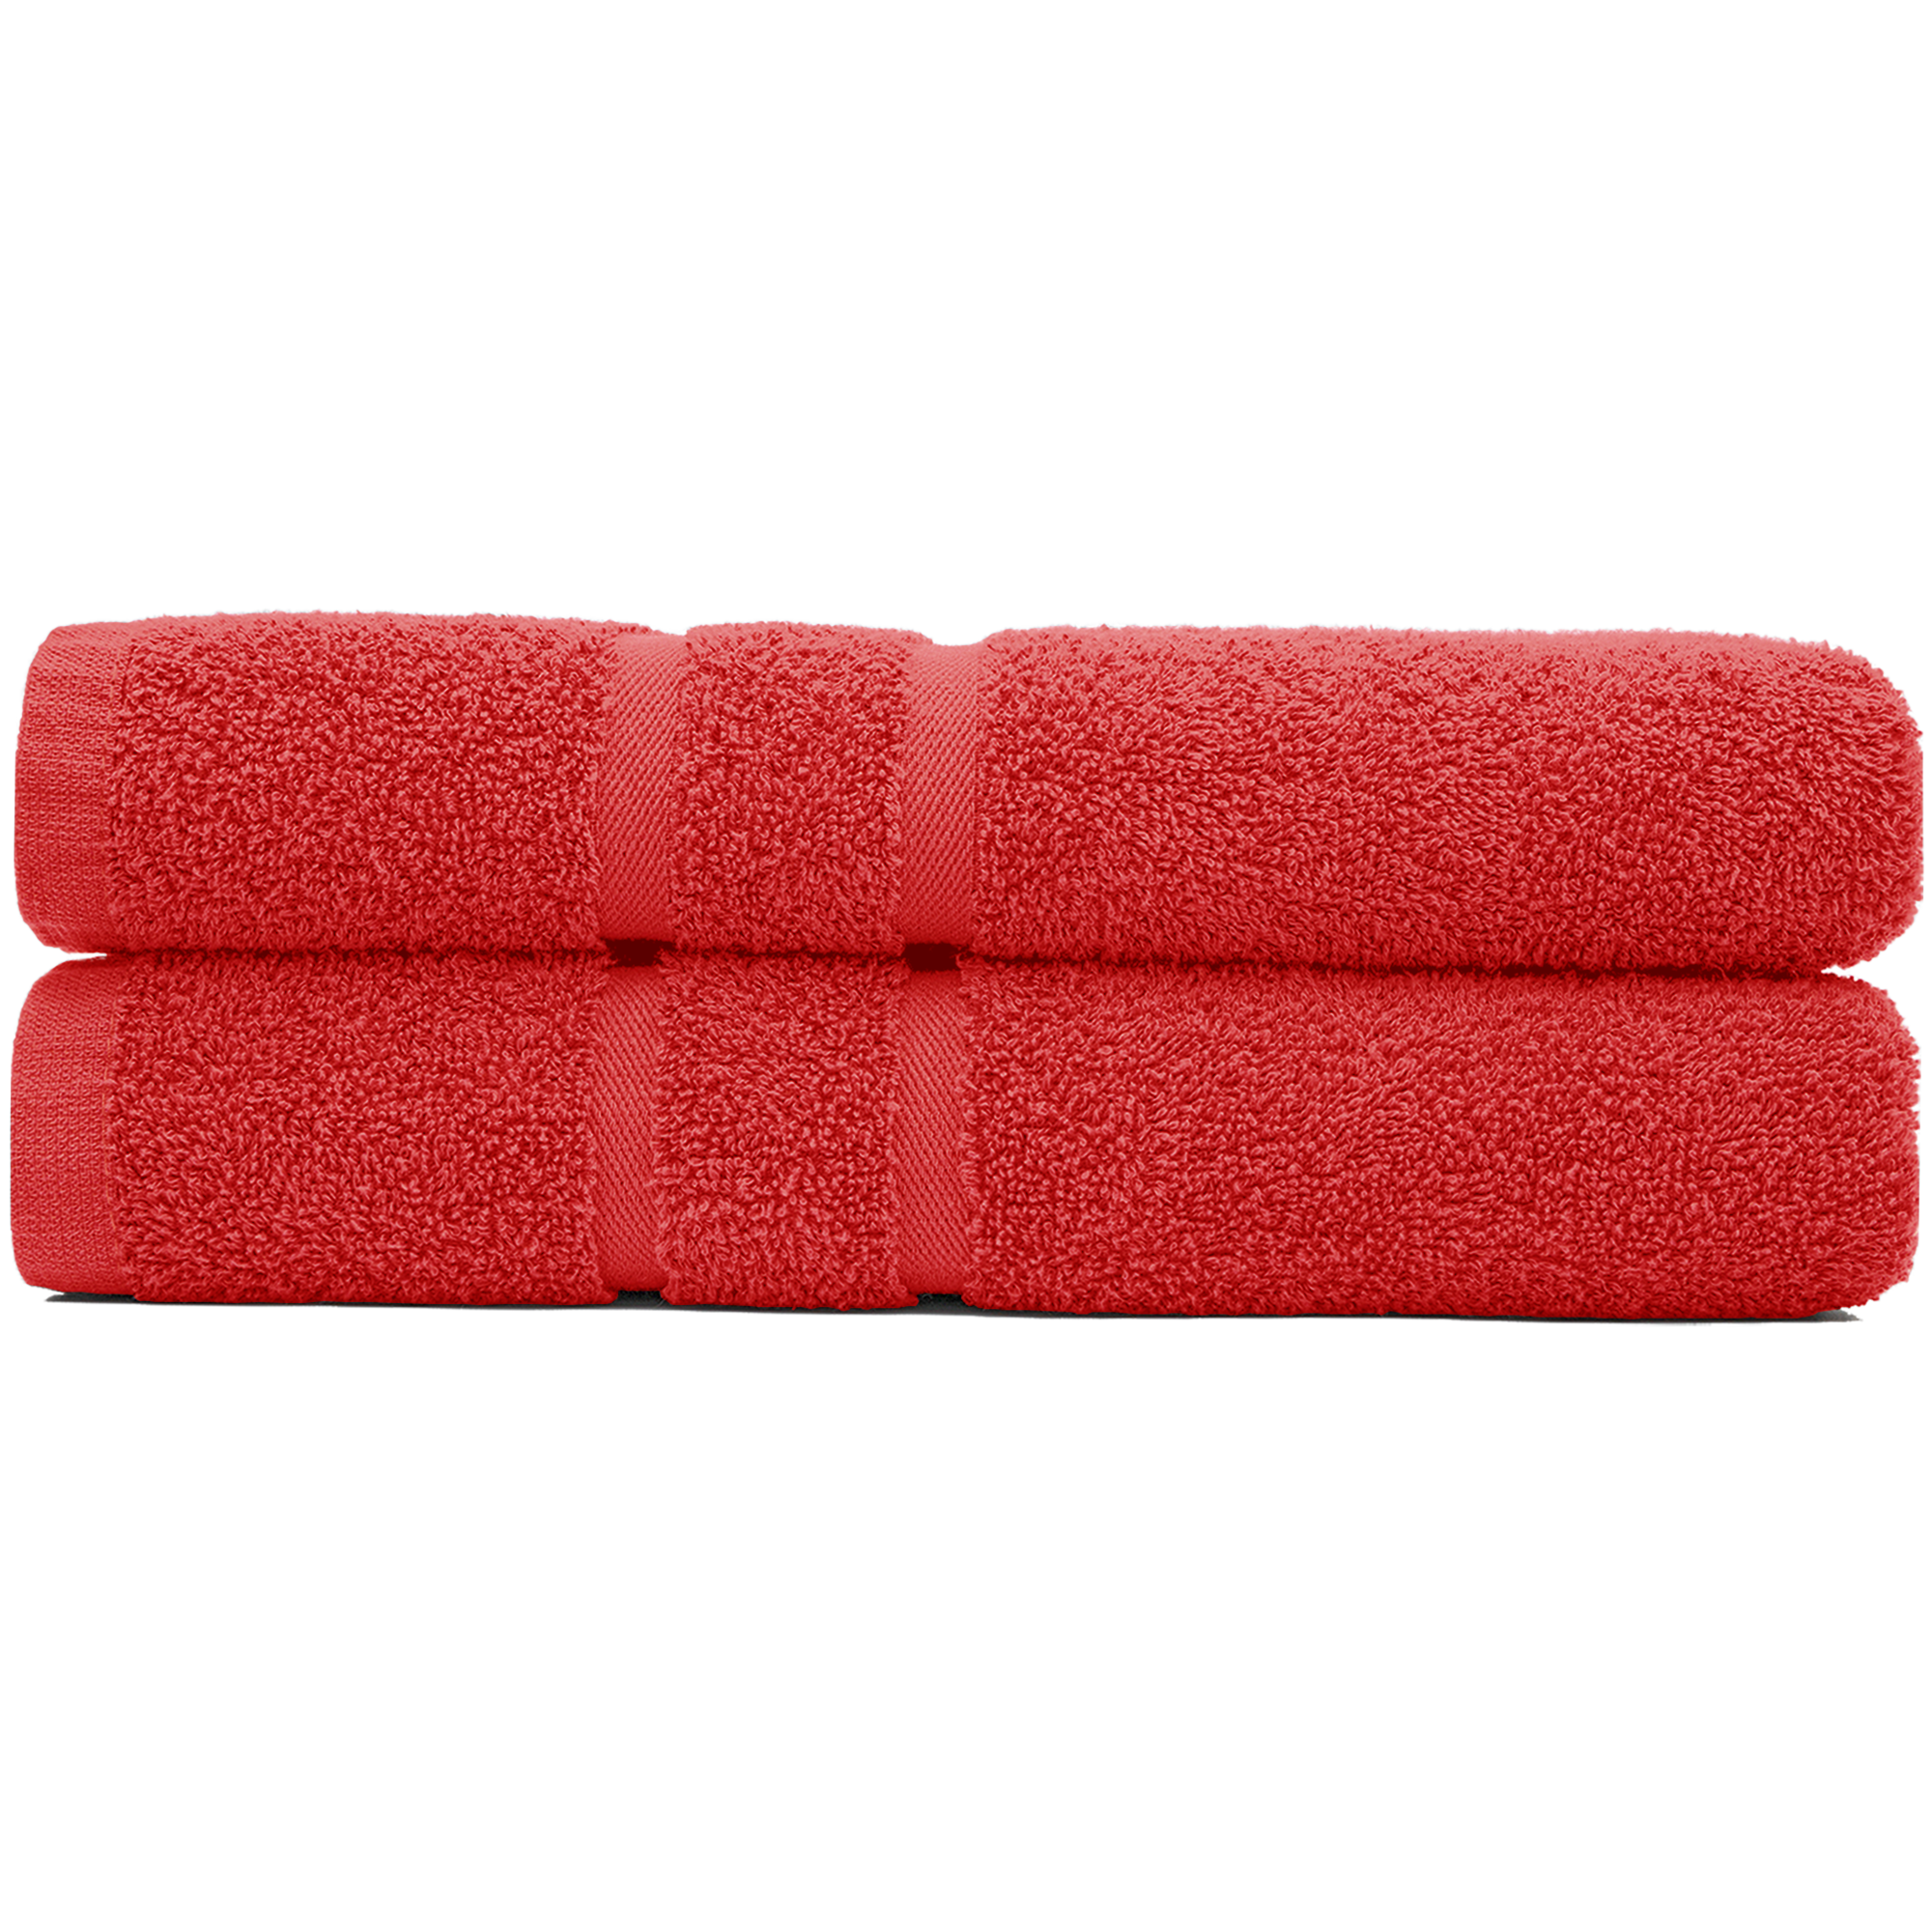 Red bath towels two pack